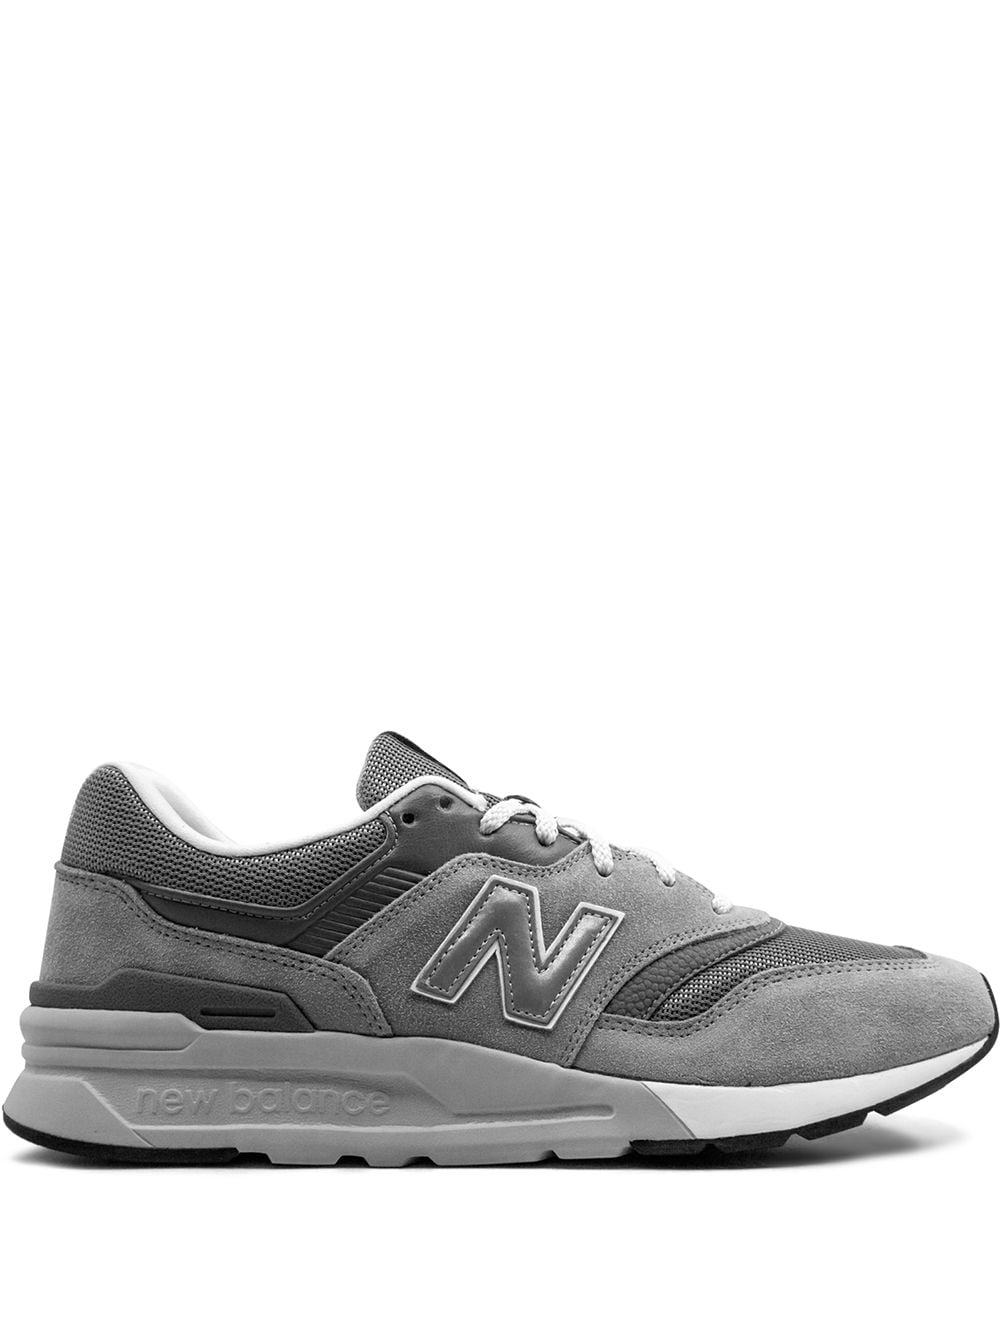 New Balance 997H low-top sneakers - Grey